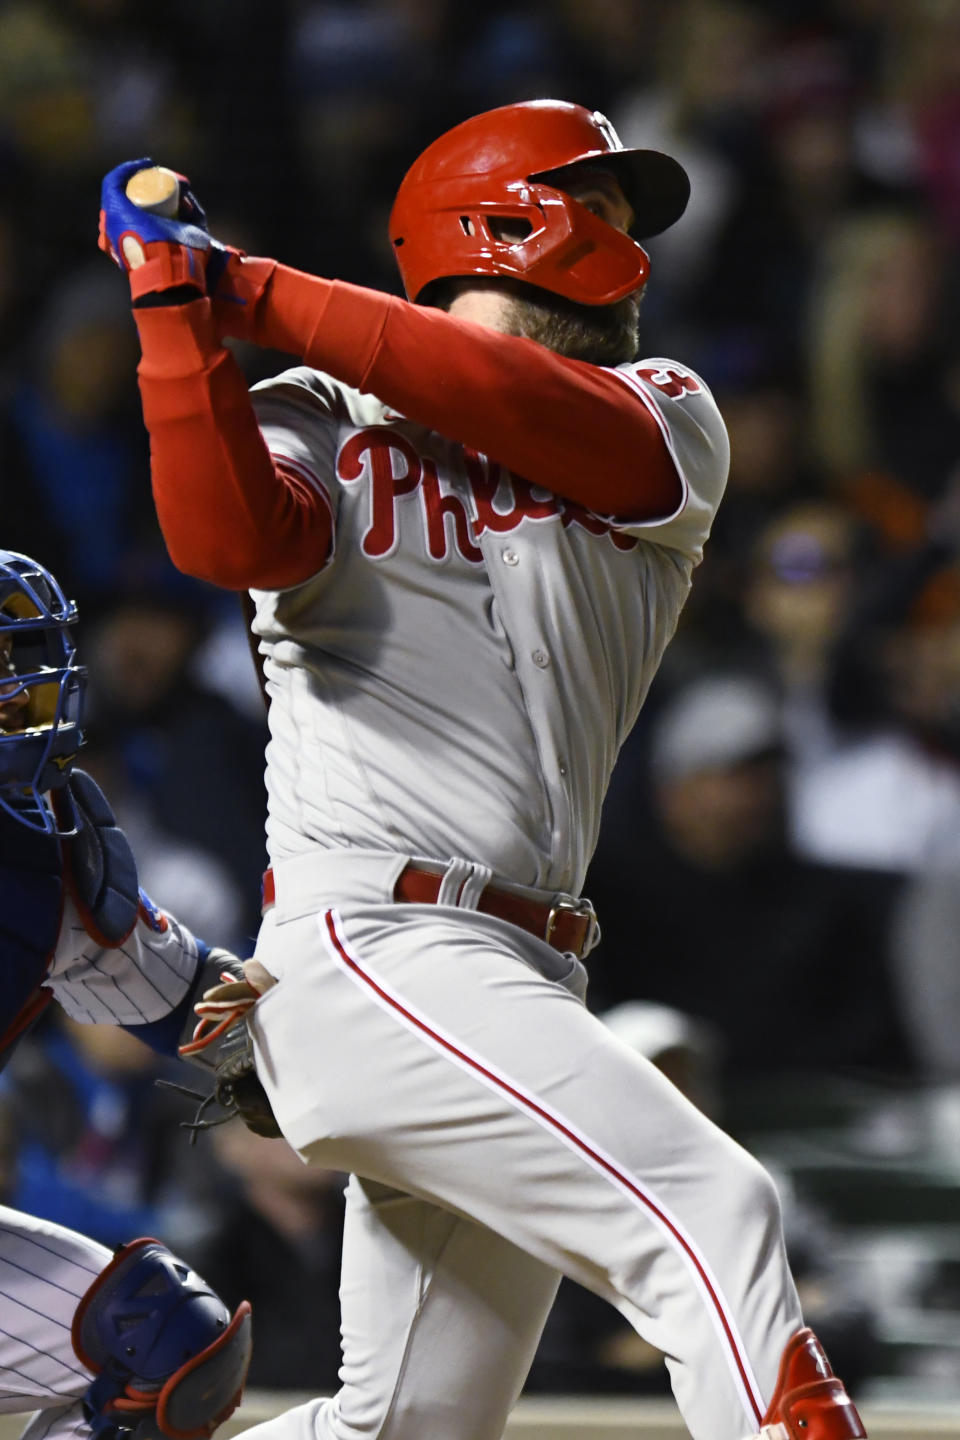 Philadelphia Phillies' Bryce Harper watches his RBI double during the sixth inning of the team's baseball game against the Chicago Cubs on Tuesday, Sept. 27, 2022, in Chicago. (AP Photo/Paul Beaty)